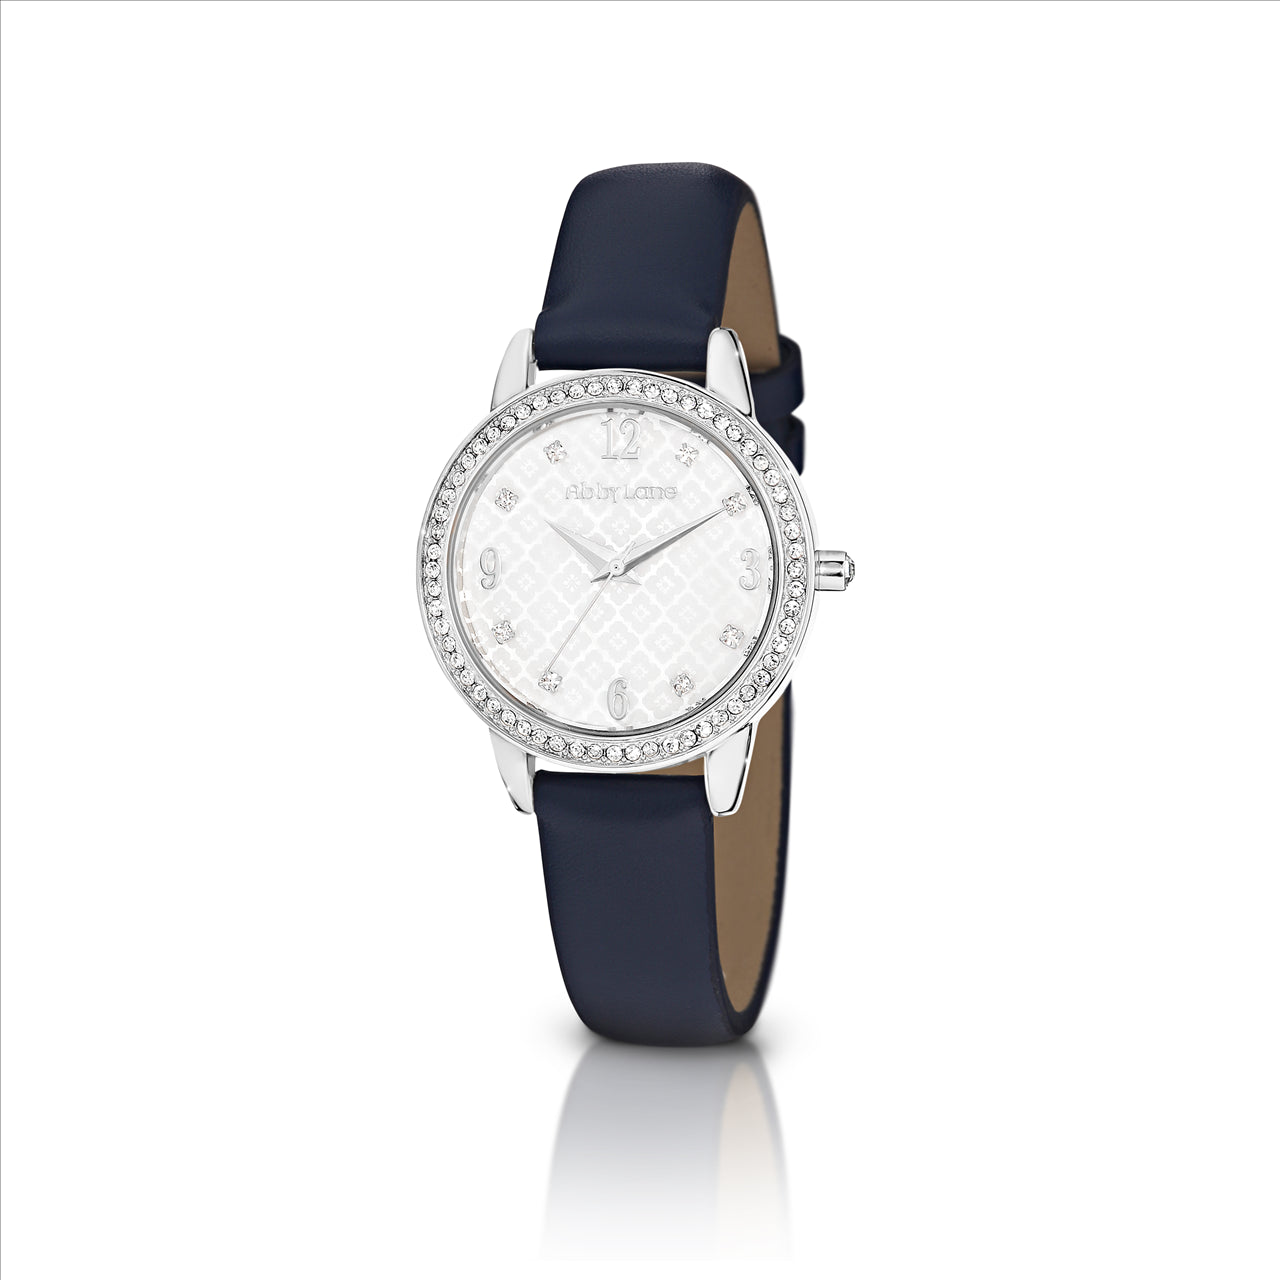 Abby lane elizabeth silvertone case. white etched dial with crystals. navy leather strap--case size 31mm